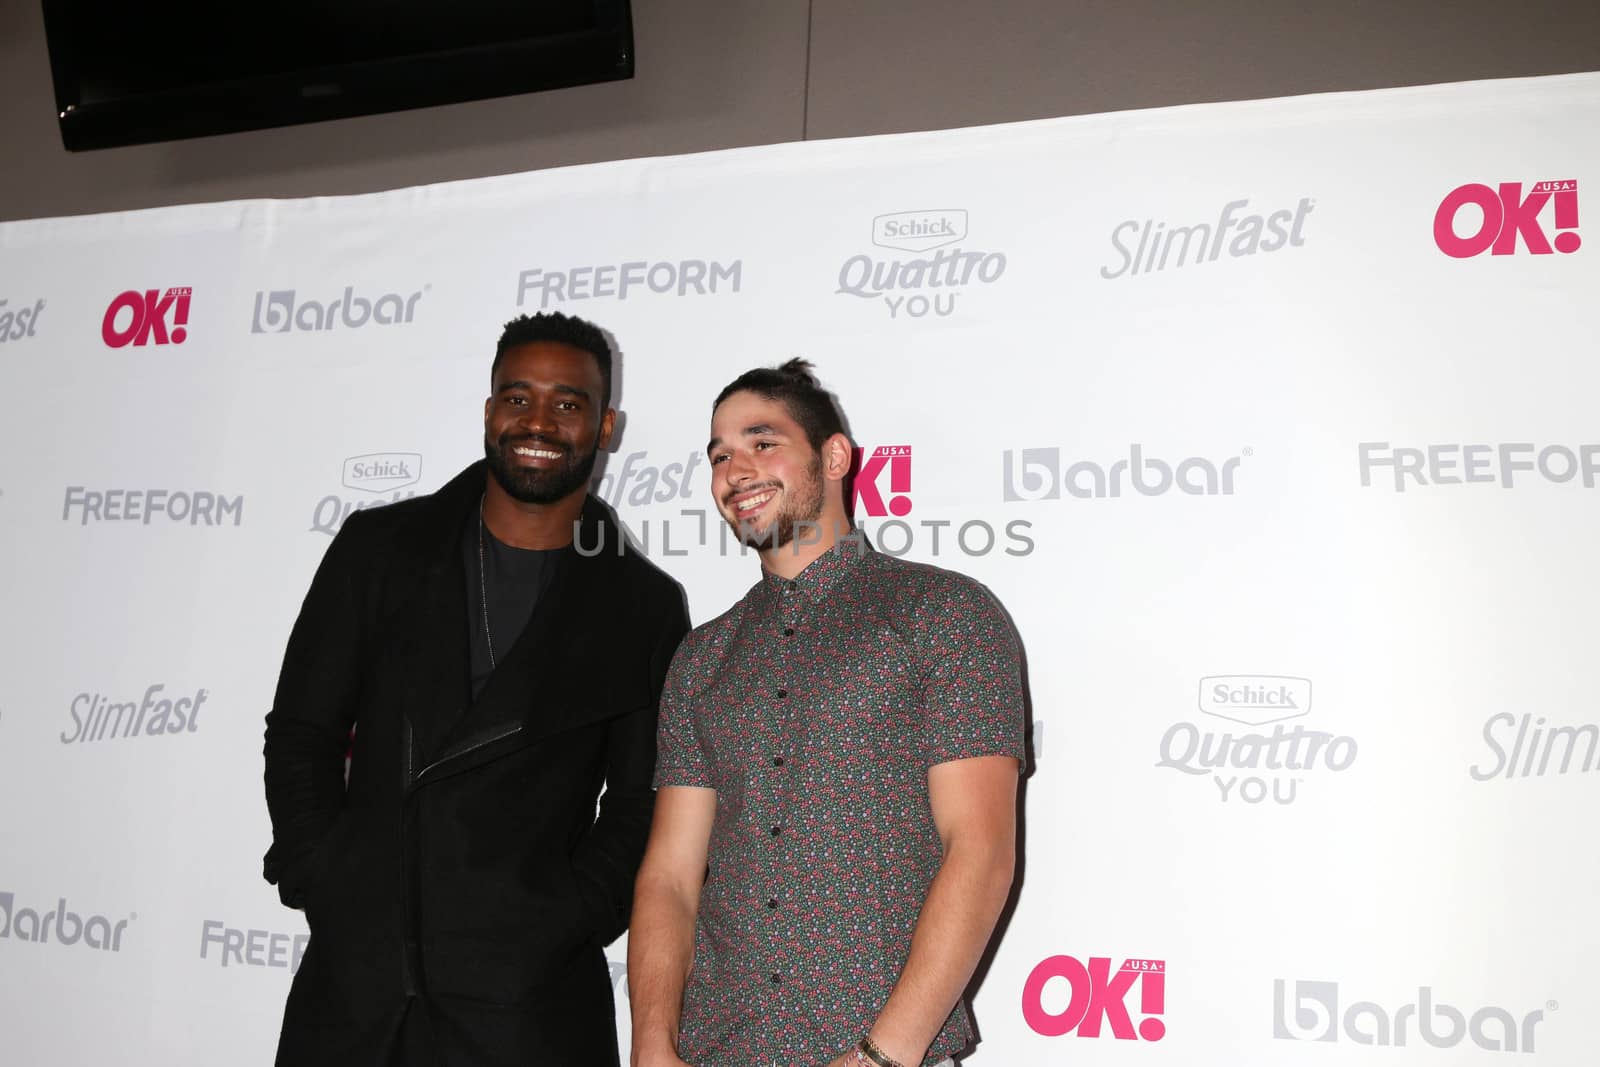 Keo Motsepe, Alan Bersten
at the OK! Magazine Summer Kick-Off Party, W Hollywood Hotel, Hollywood, CA 05-17-17/ImageCollect by ImageCollect